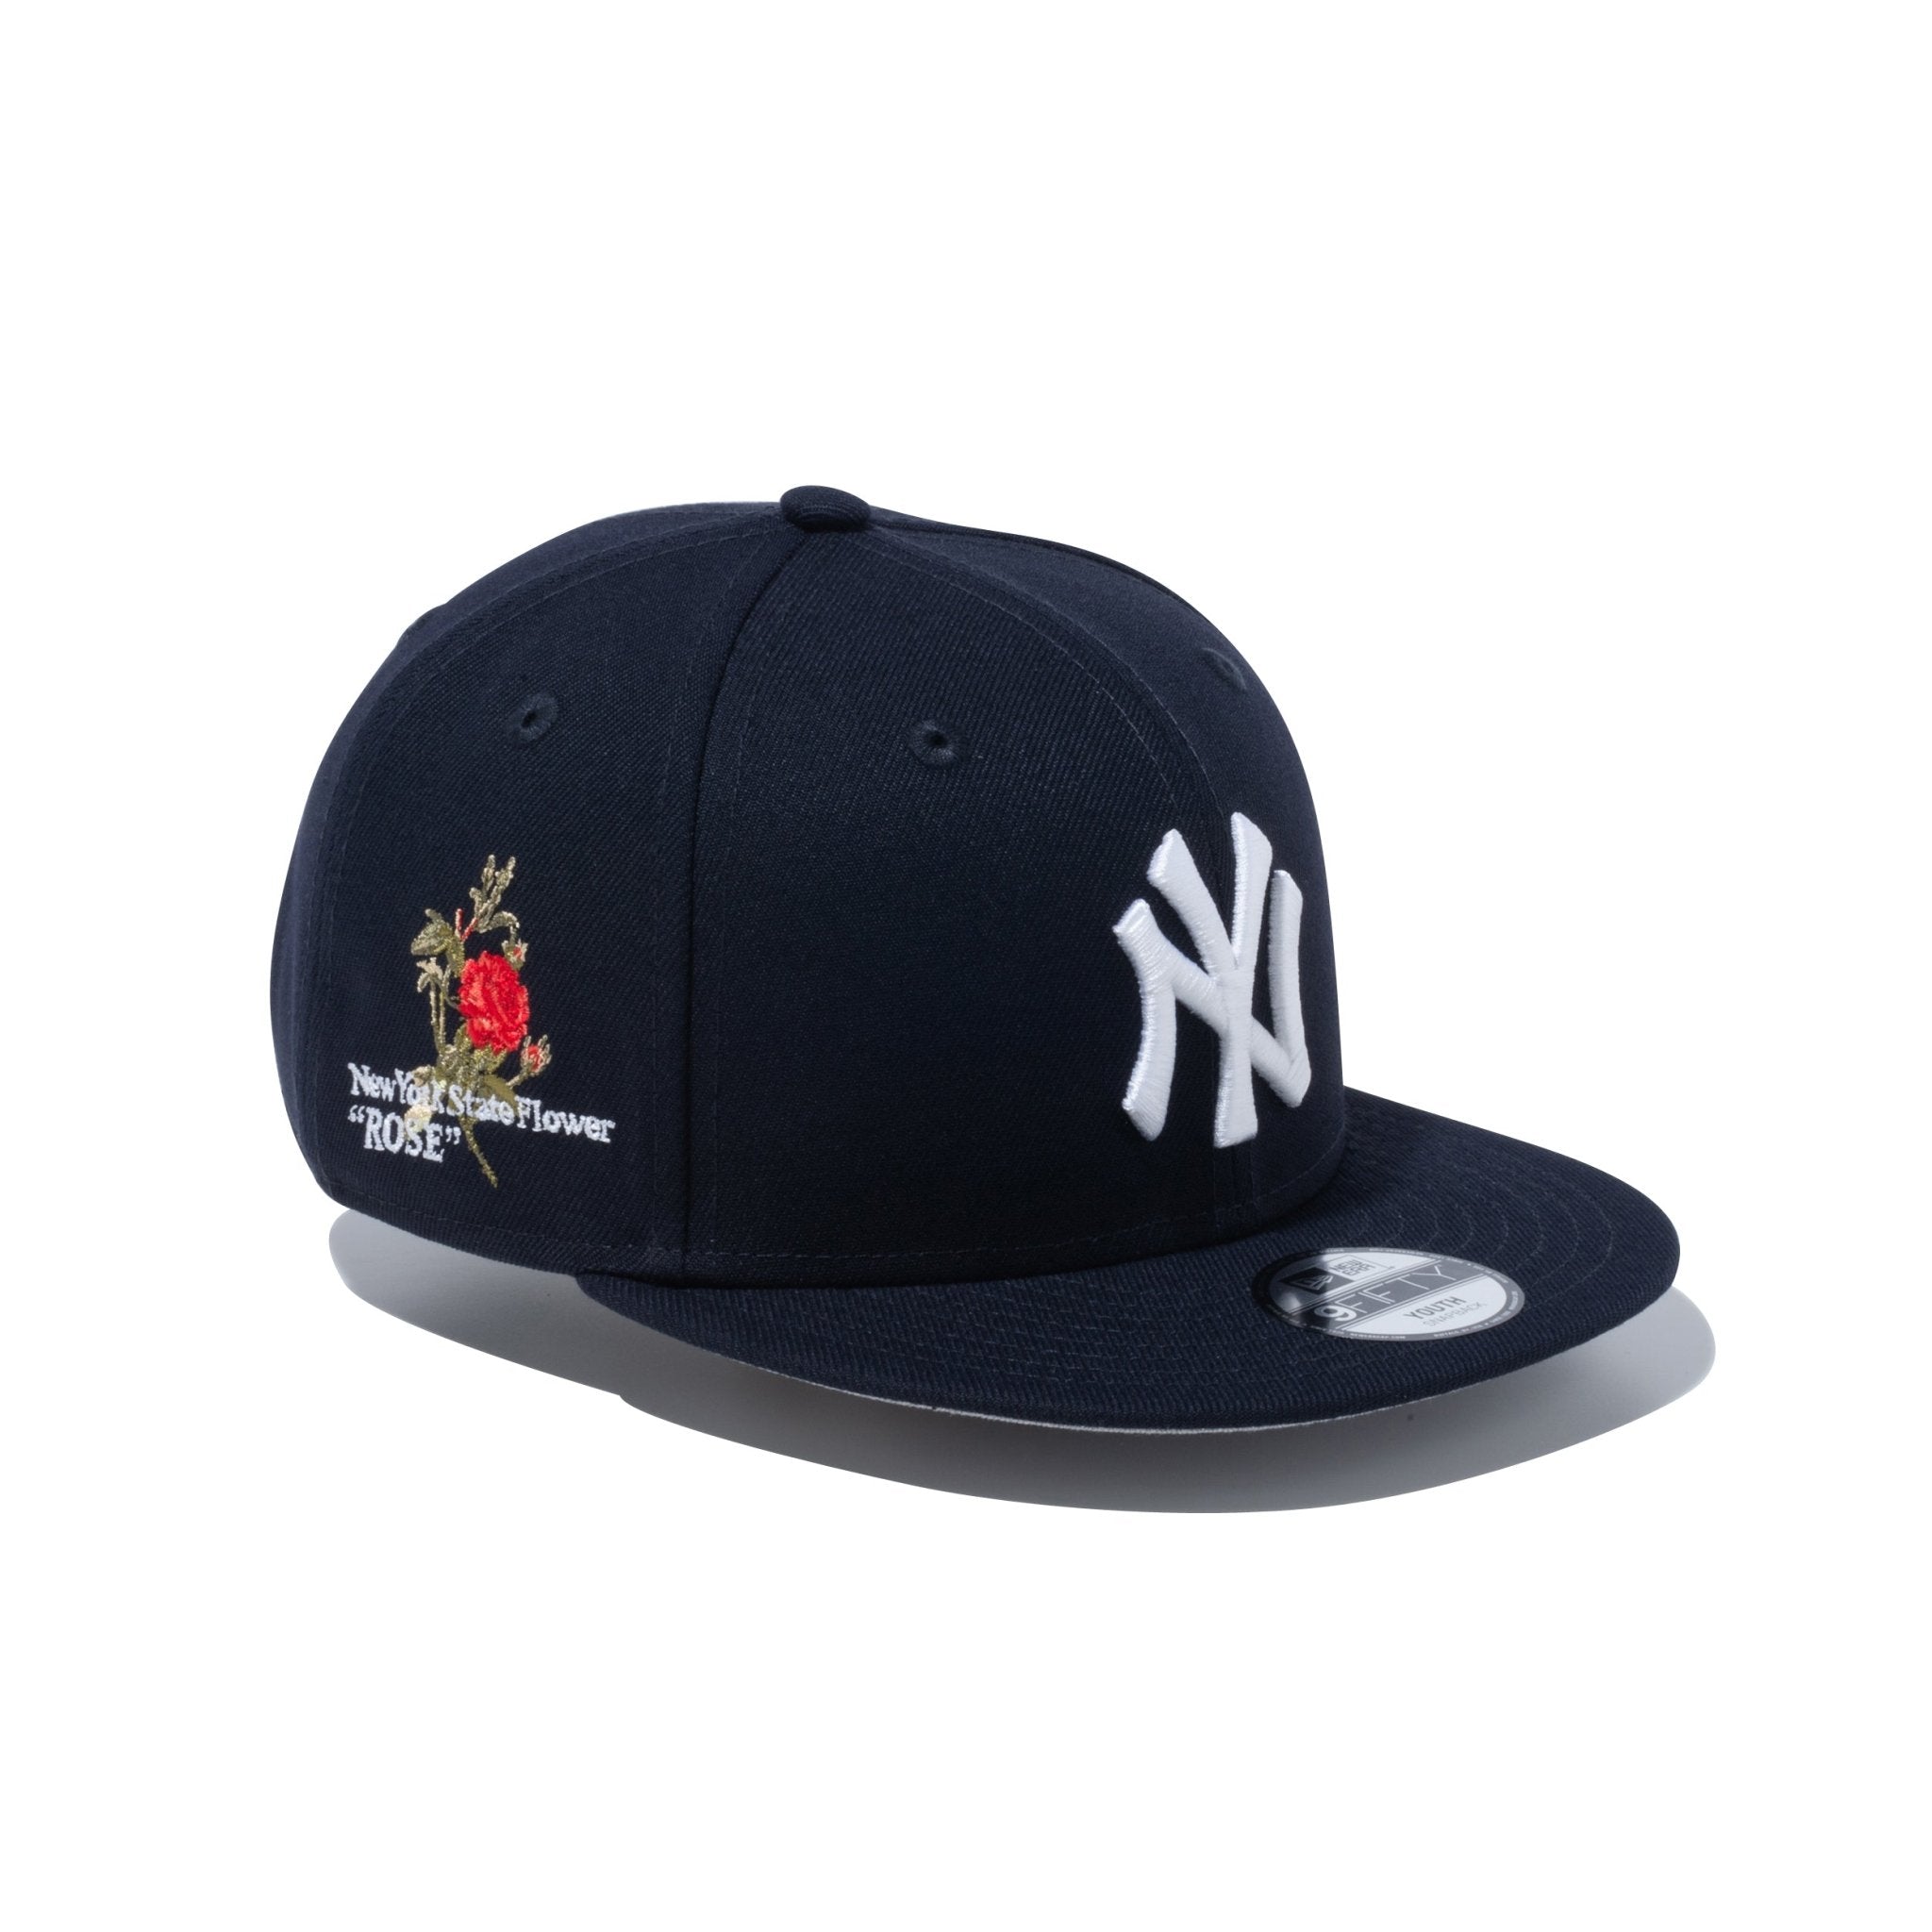 Youth 9FIFTY MLB State Flowers ニューヨーク・ヤンキース ネイビー 